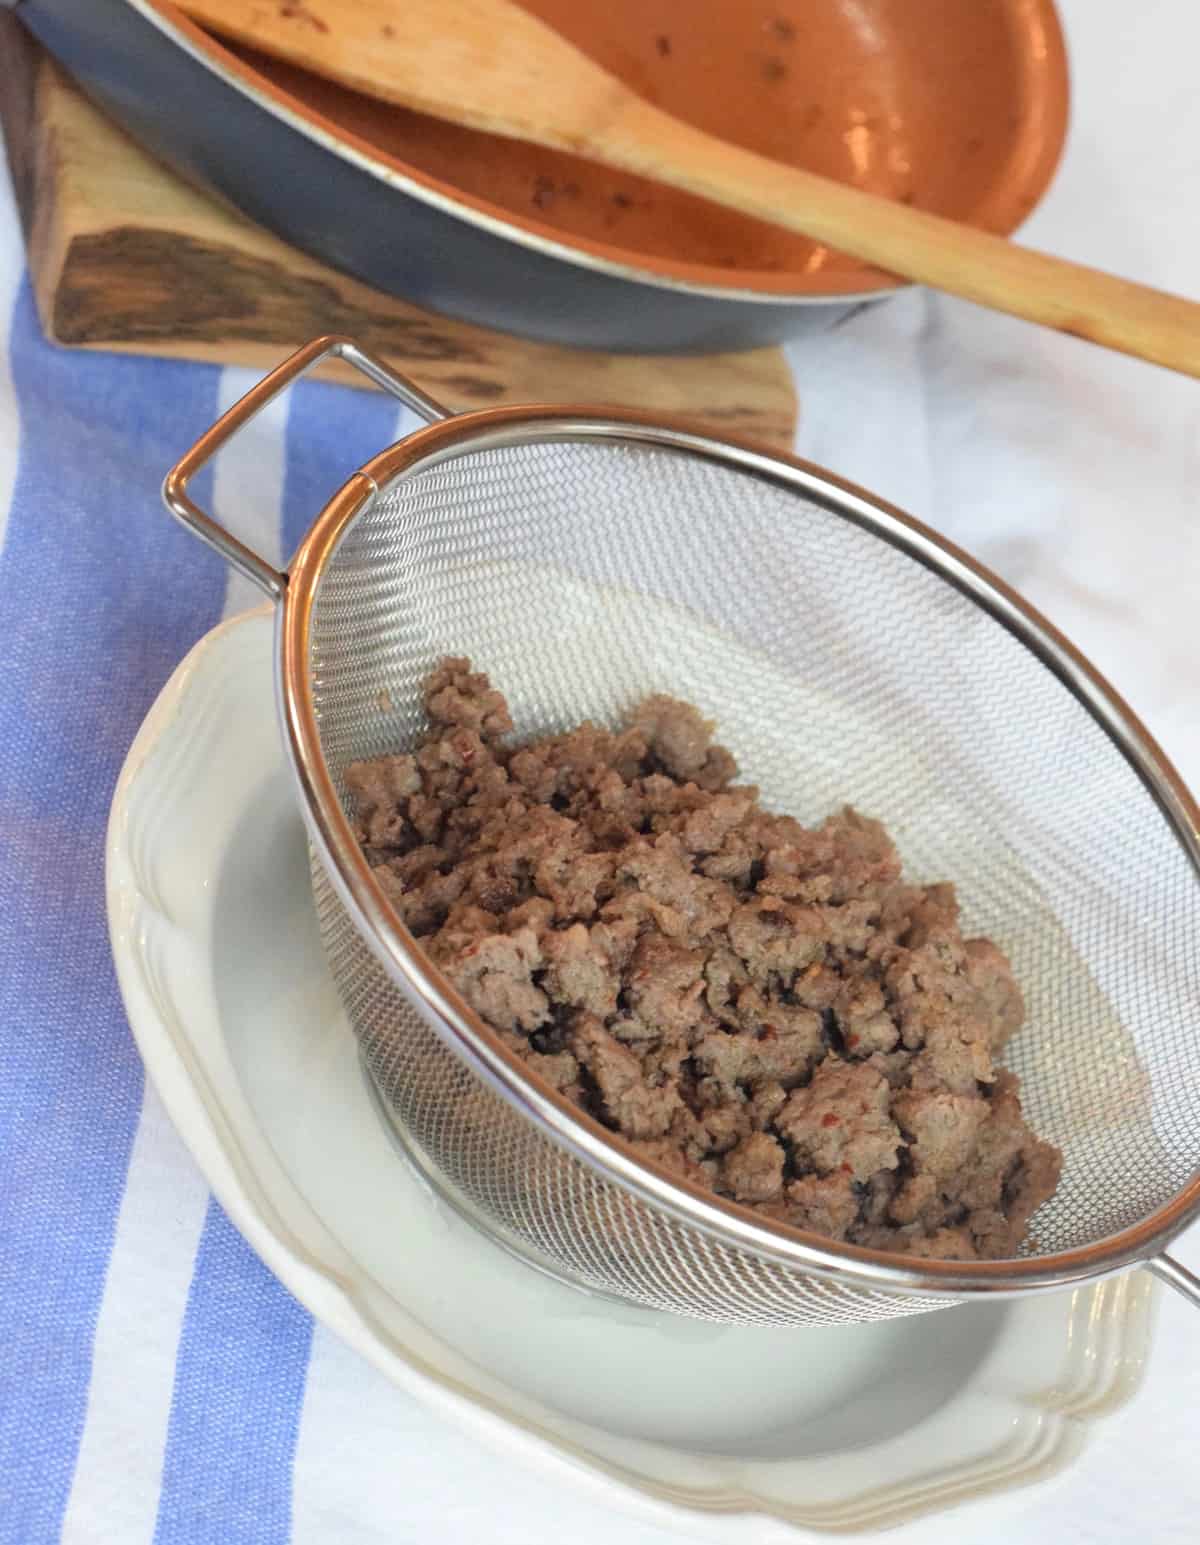 Cooked ground sausage in metal strainer.